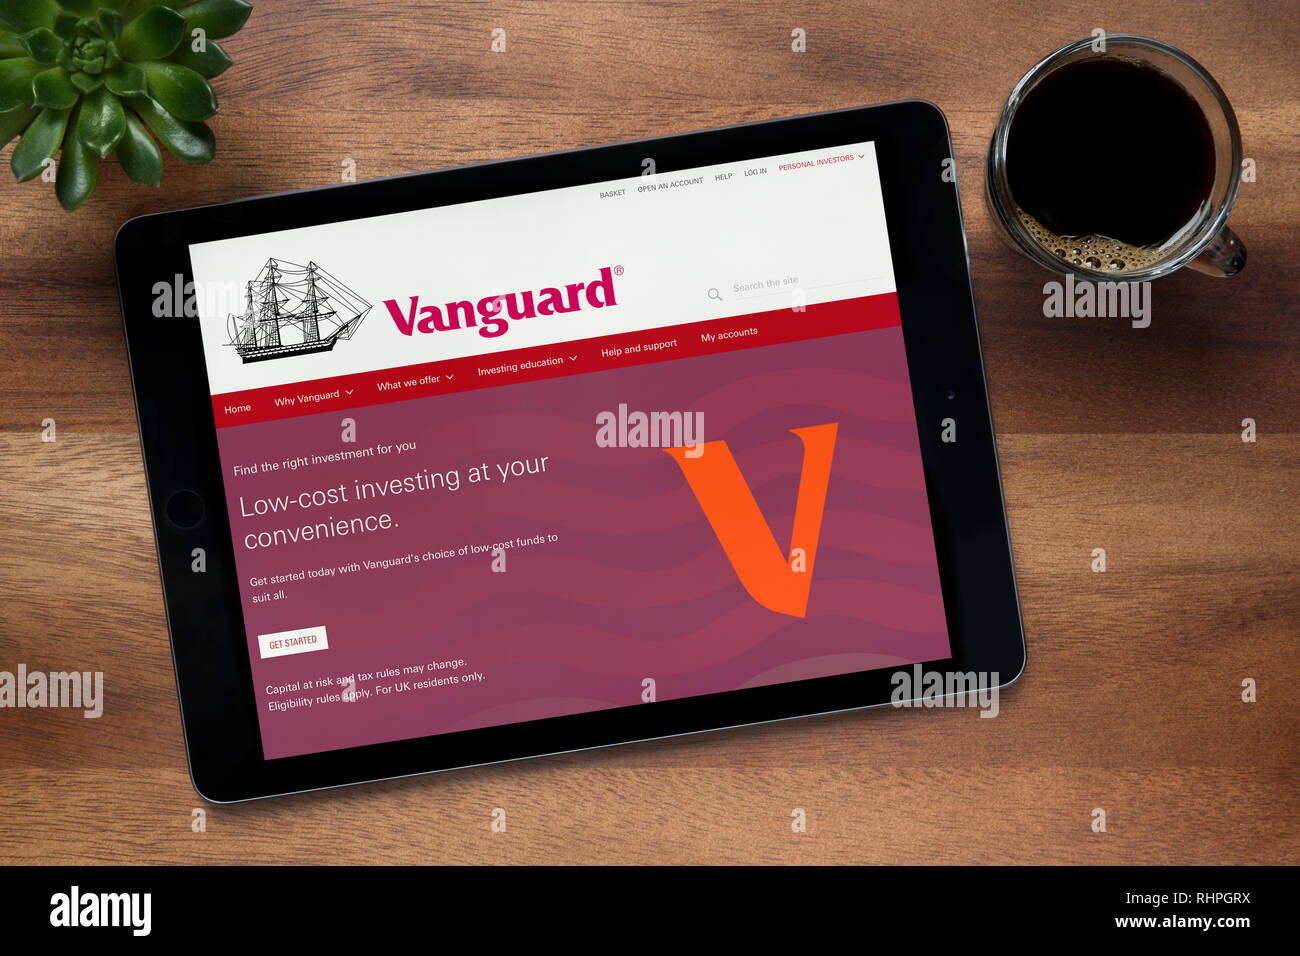 The website of Vanguard is seen on an iPad tablet, on a wooden table along with an espresso coffee and a house plant (Editorial use only). Stock Photo